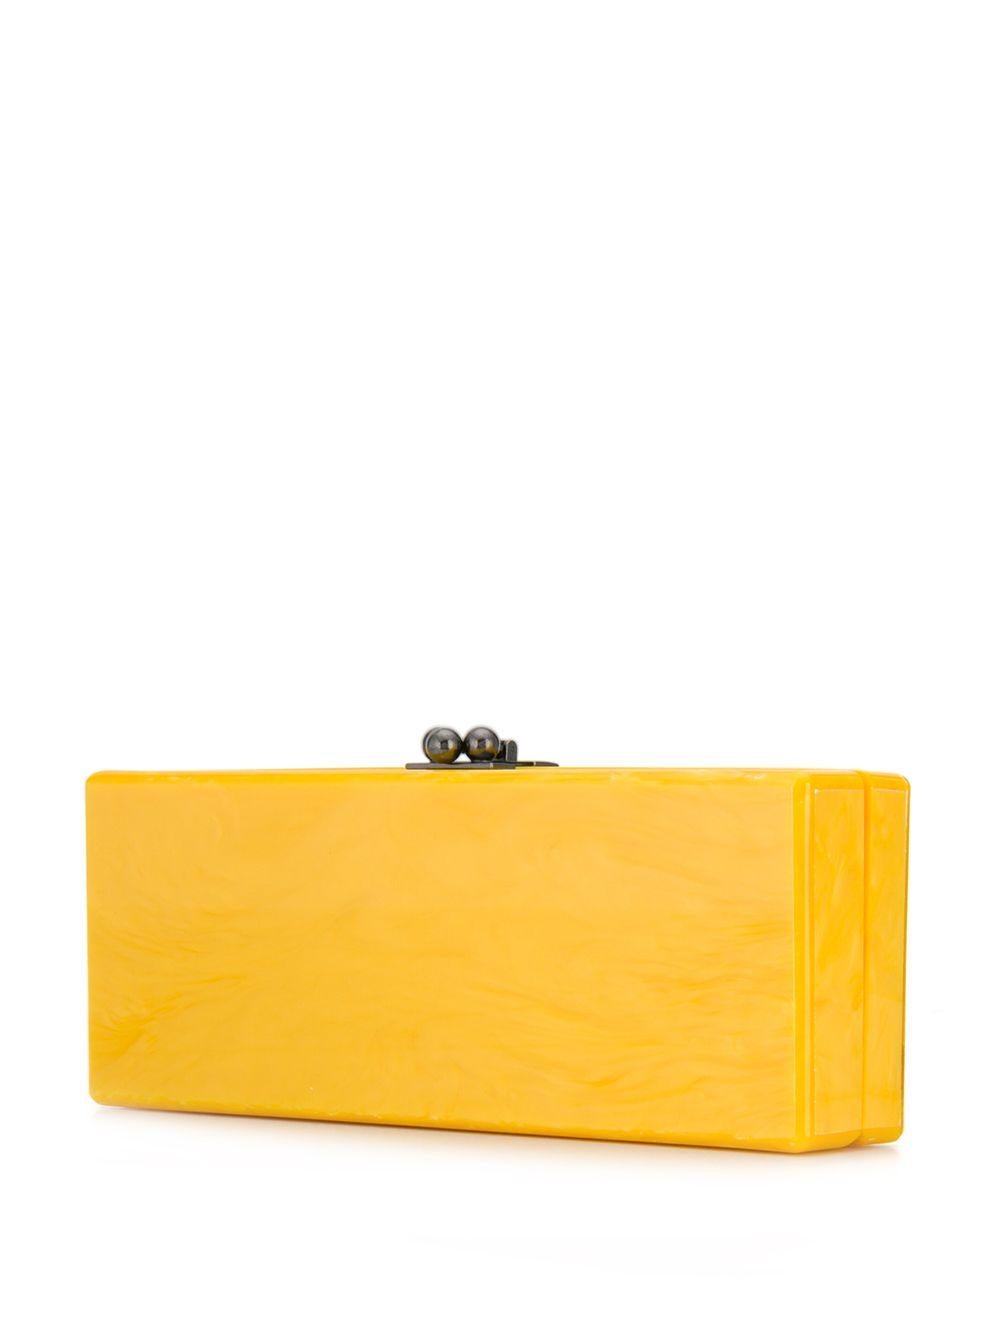 Add a wink of playfulness to your #OOTN with this statement-making Edie Parker clutch. Dazzlingly crafted from hand-poured acrylic, its pearlised yellow case is married with gunmetal-tone hardware and features a structured design, 'Happy' slogan